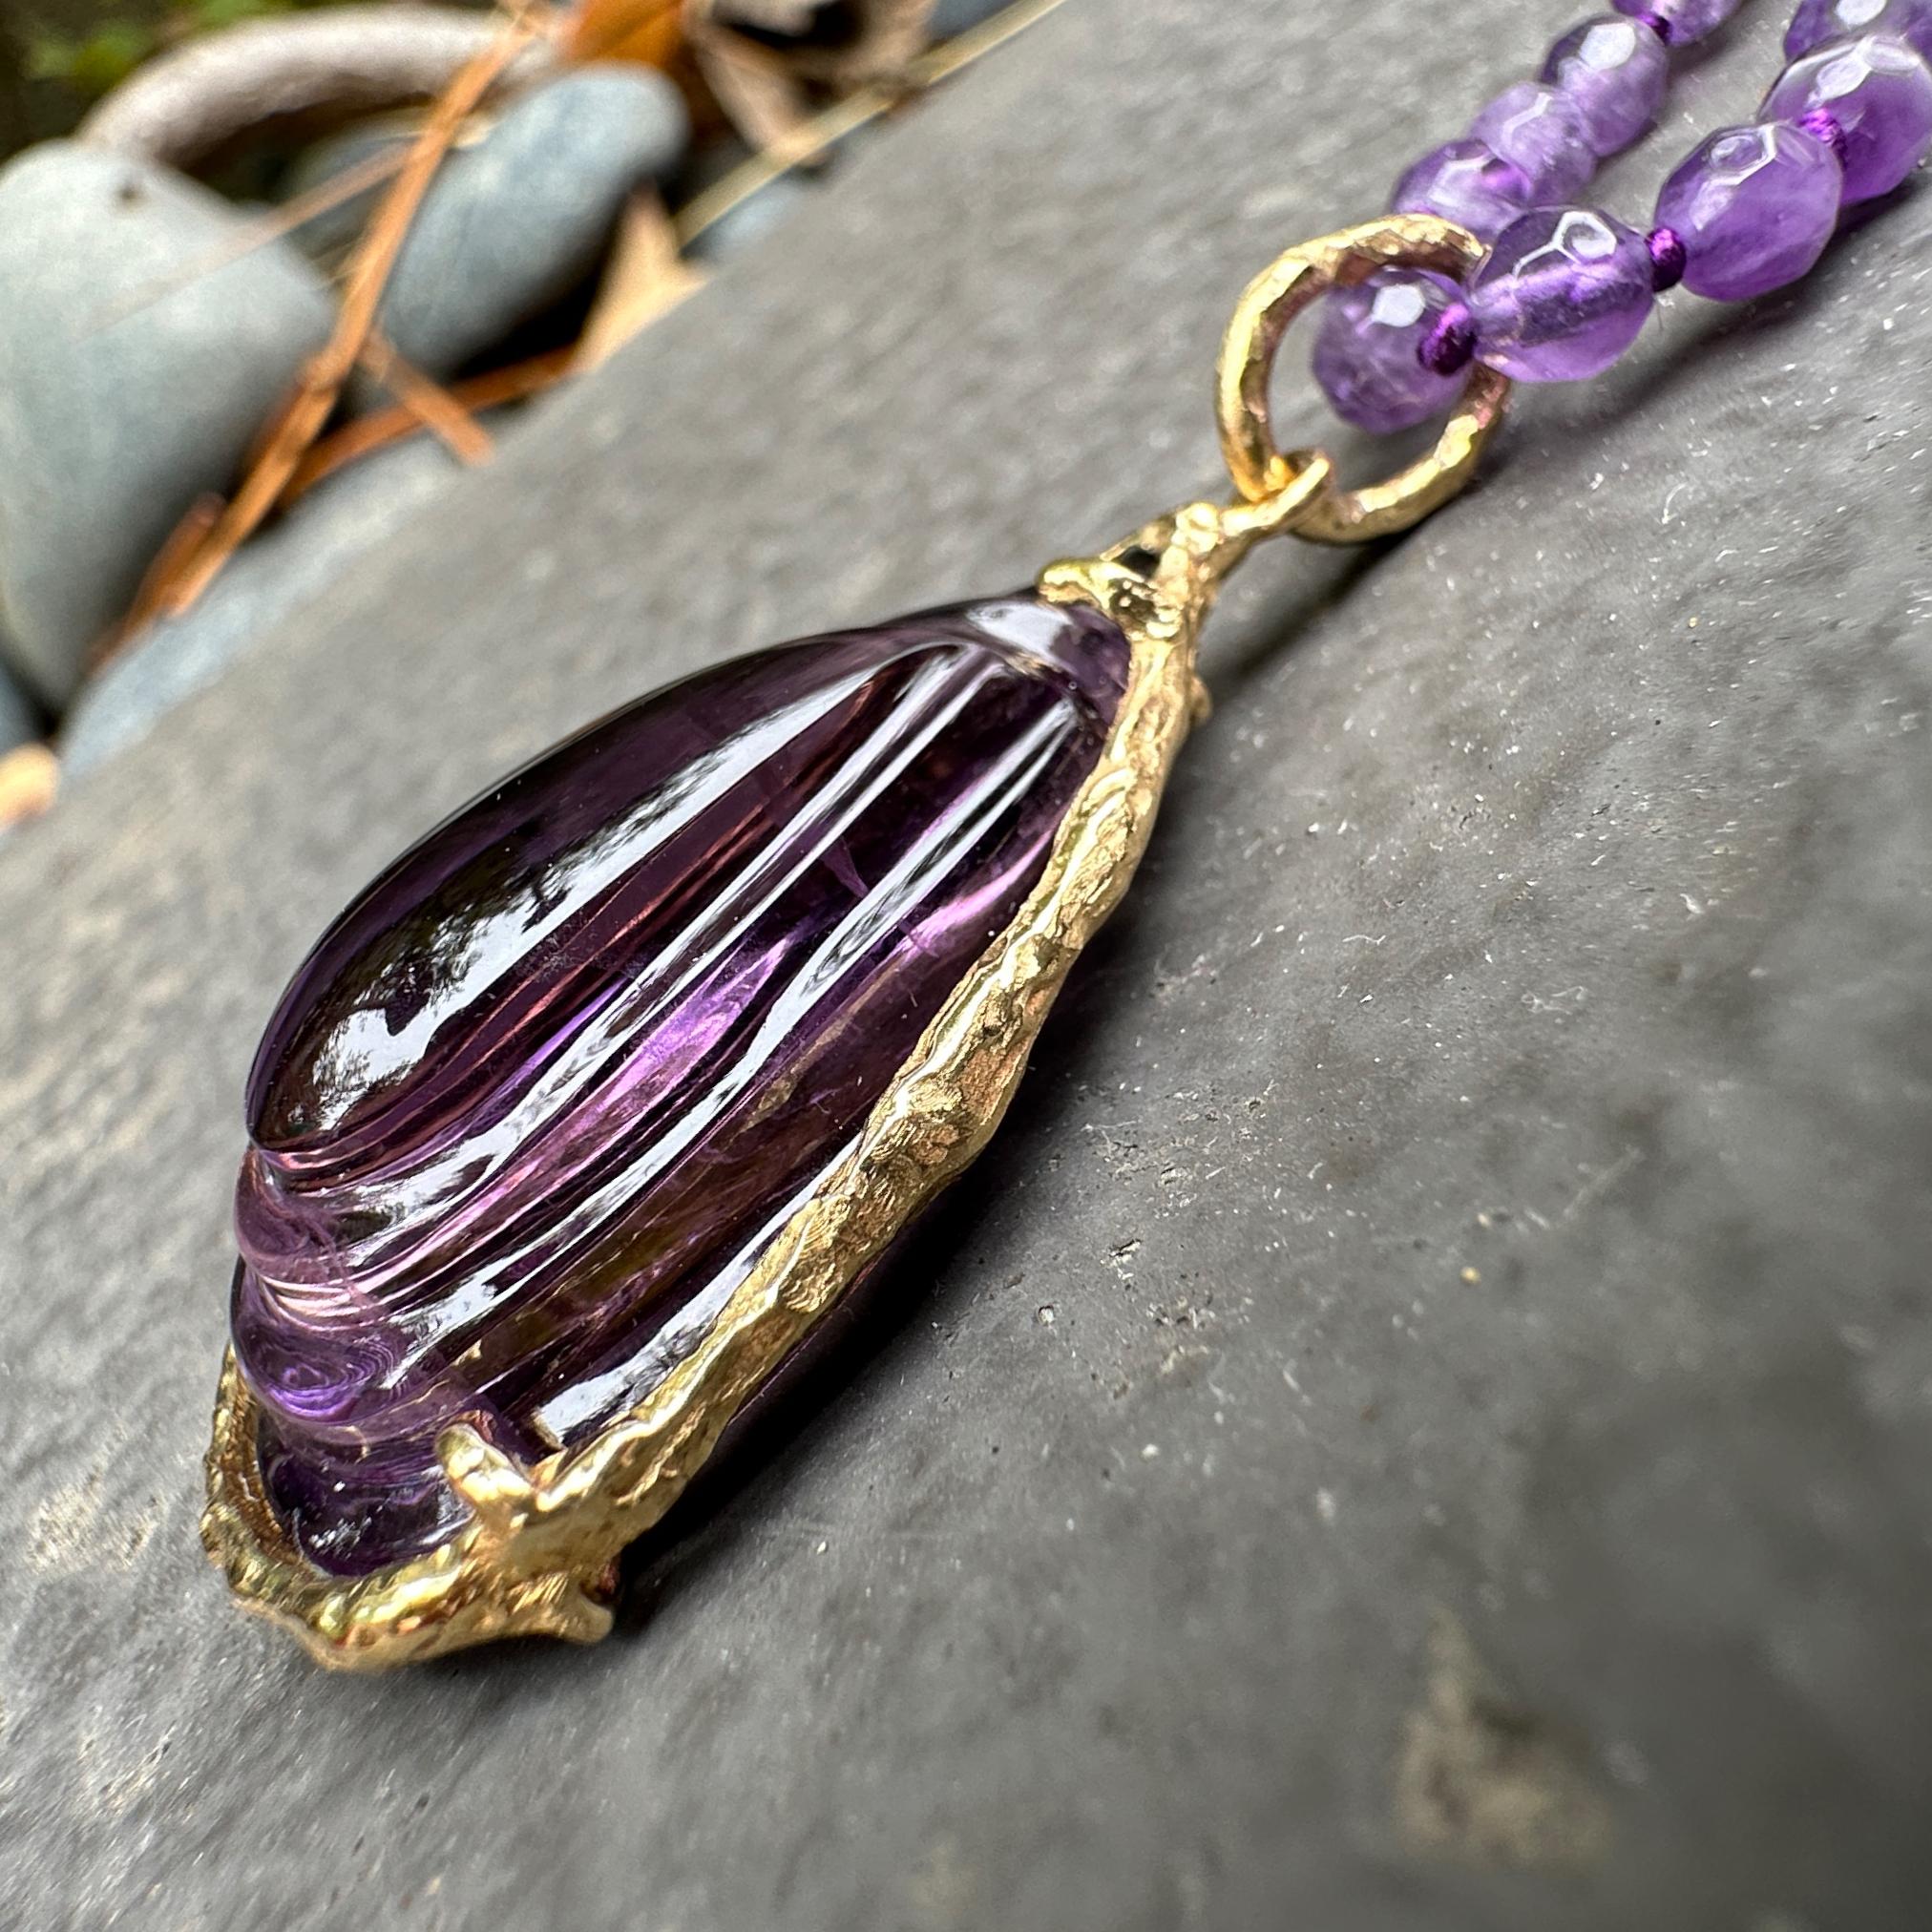 39 Carat Carved Amethyst Pendant in 18K Gold on Convertible Amethyst Bead Chain For Sale 2